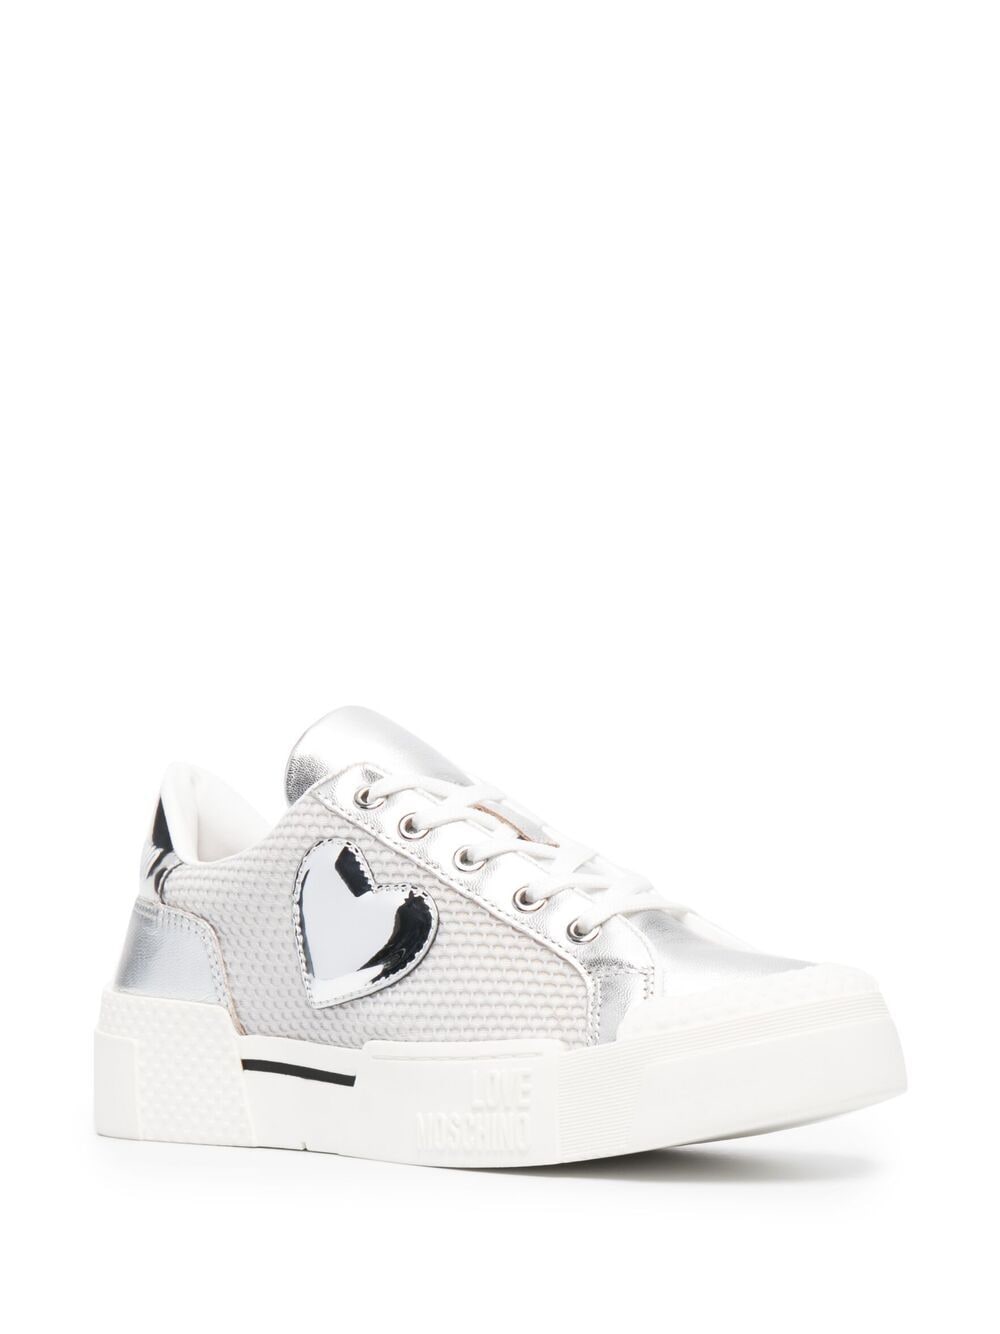 LOVE MOSCHINO SILVER SIDE HEART PATCH SNEAKER